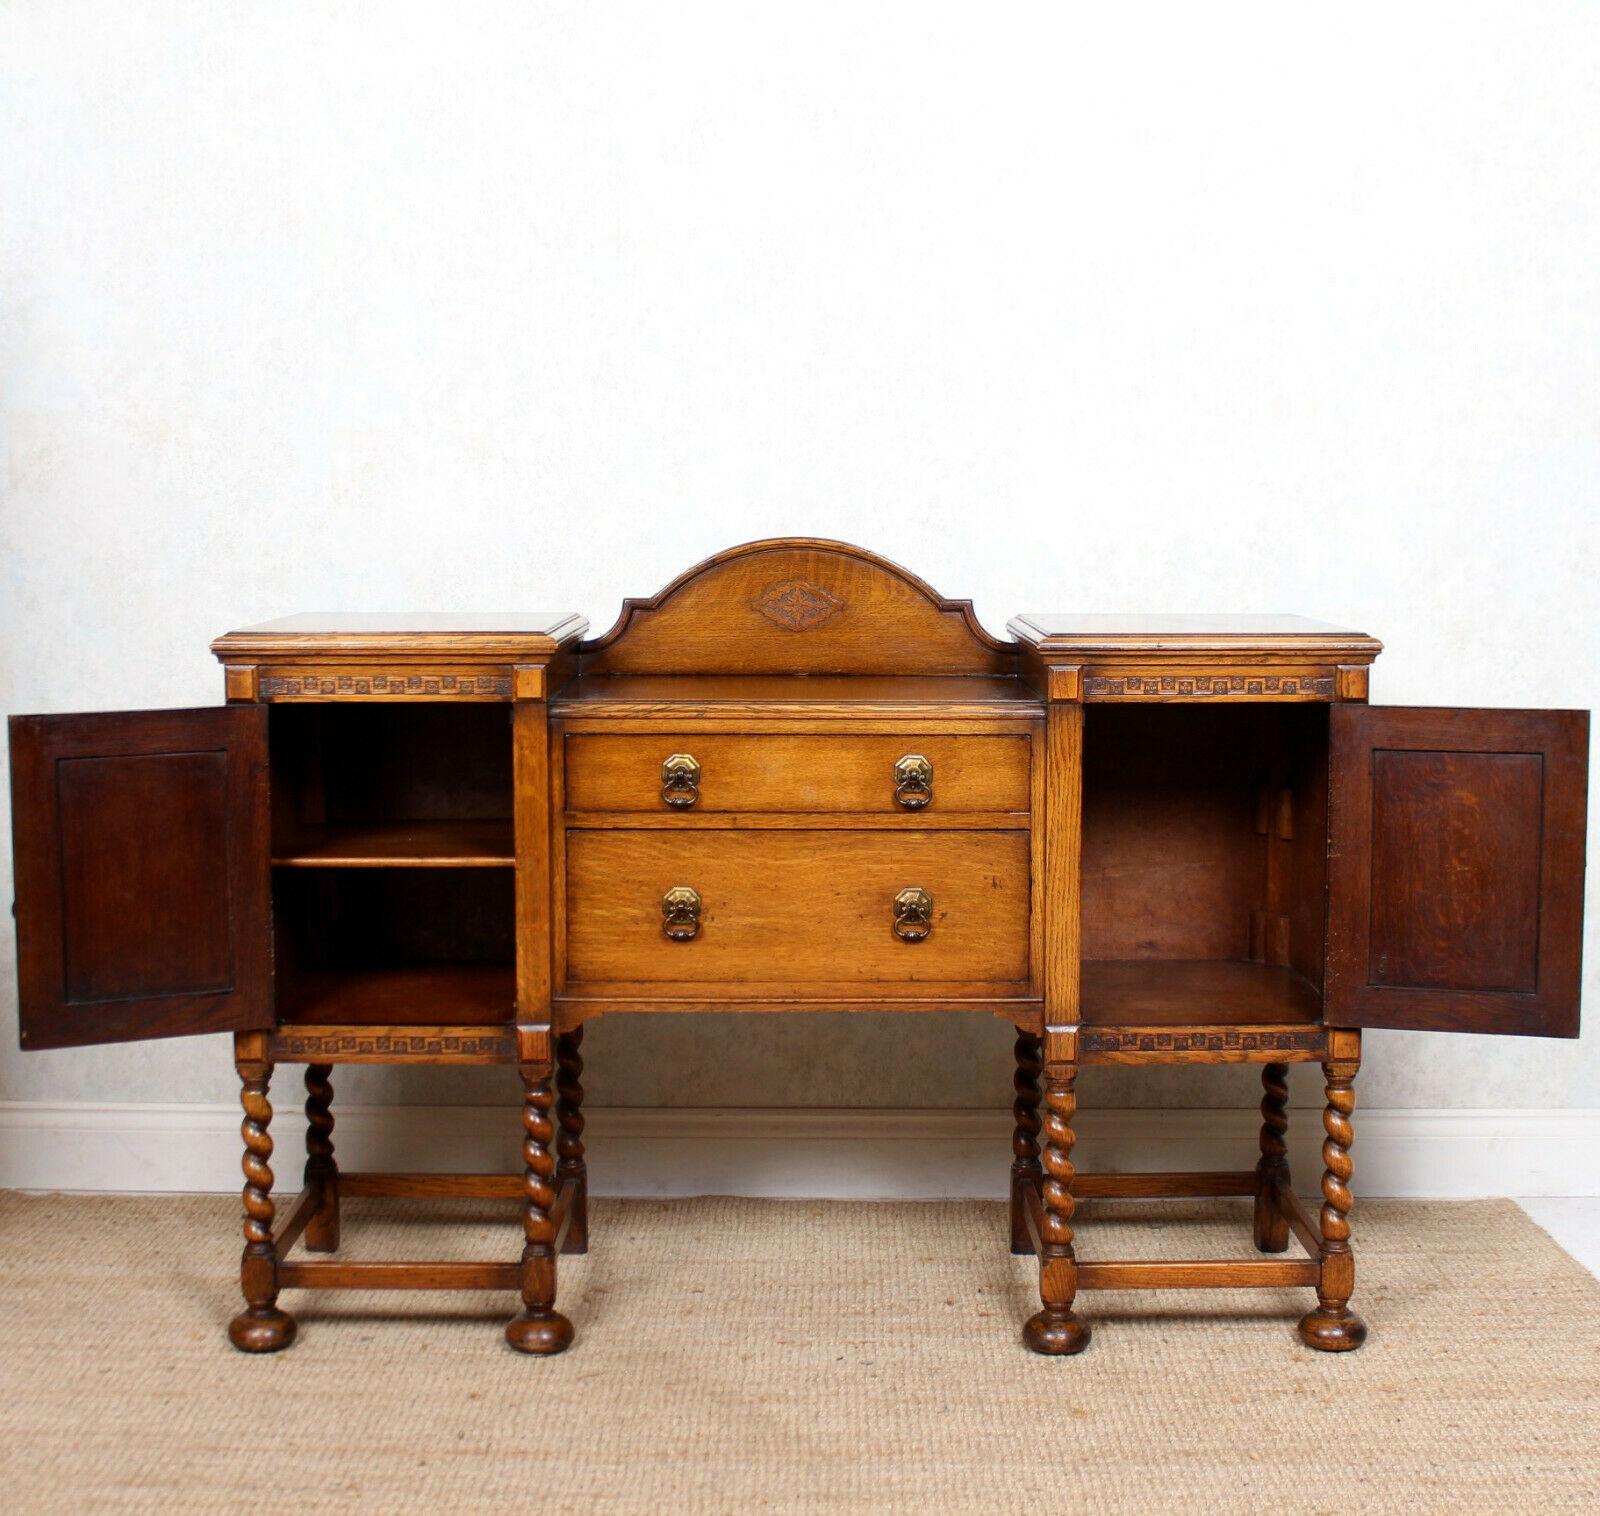 An fine quality early 19th century sideboard in the Arts & Crafts manner.

Constructed from solid oak boasting a rich honey patina and well figured wild grain and boasting impressive carvings throughout with chamfered edges.

A carved demilune